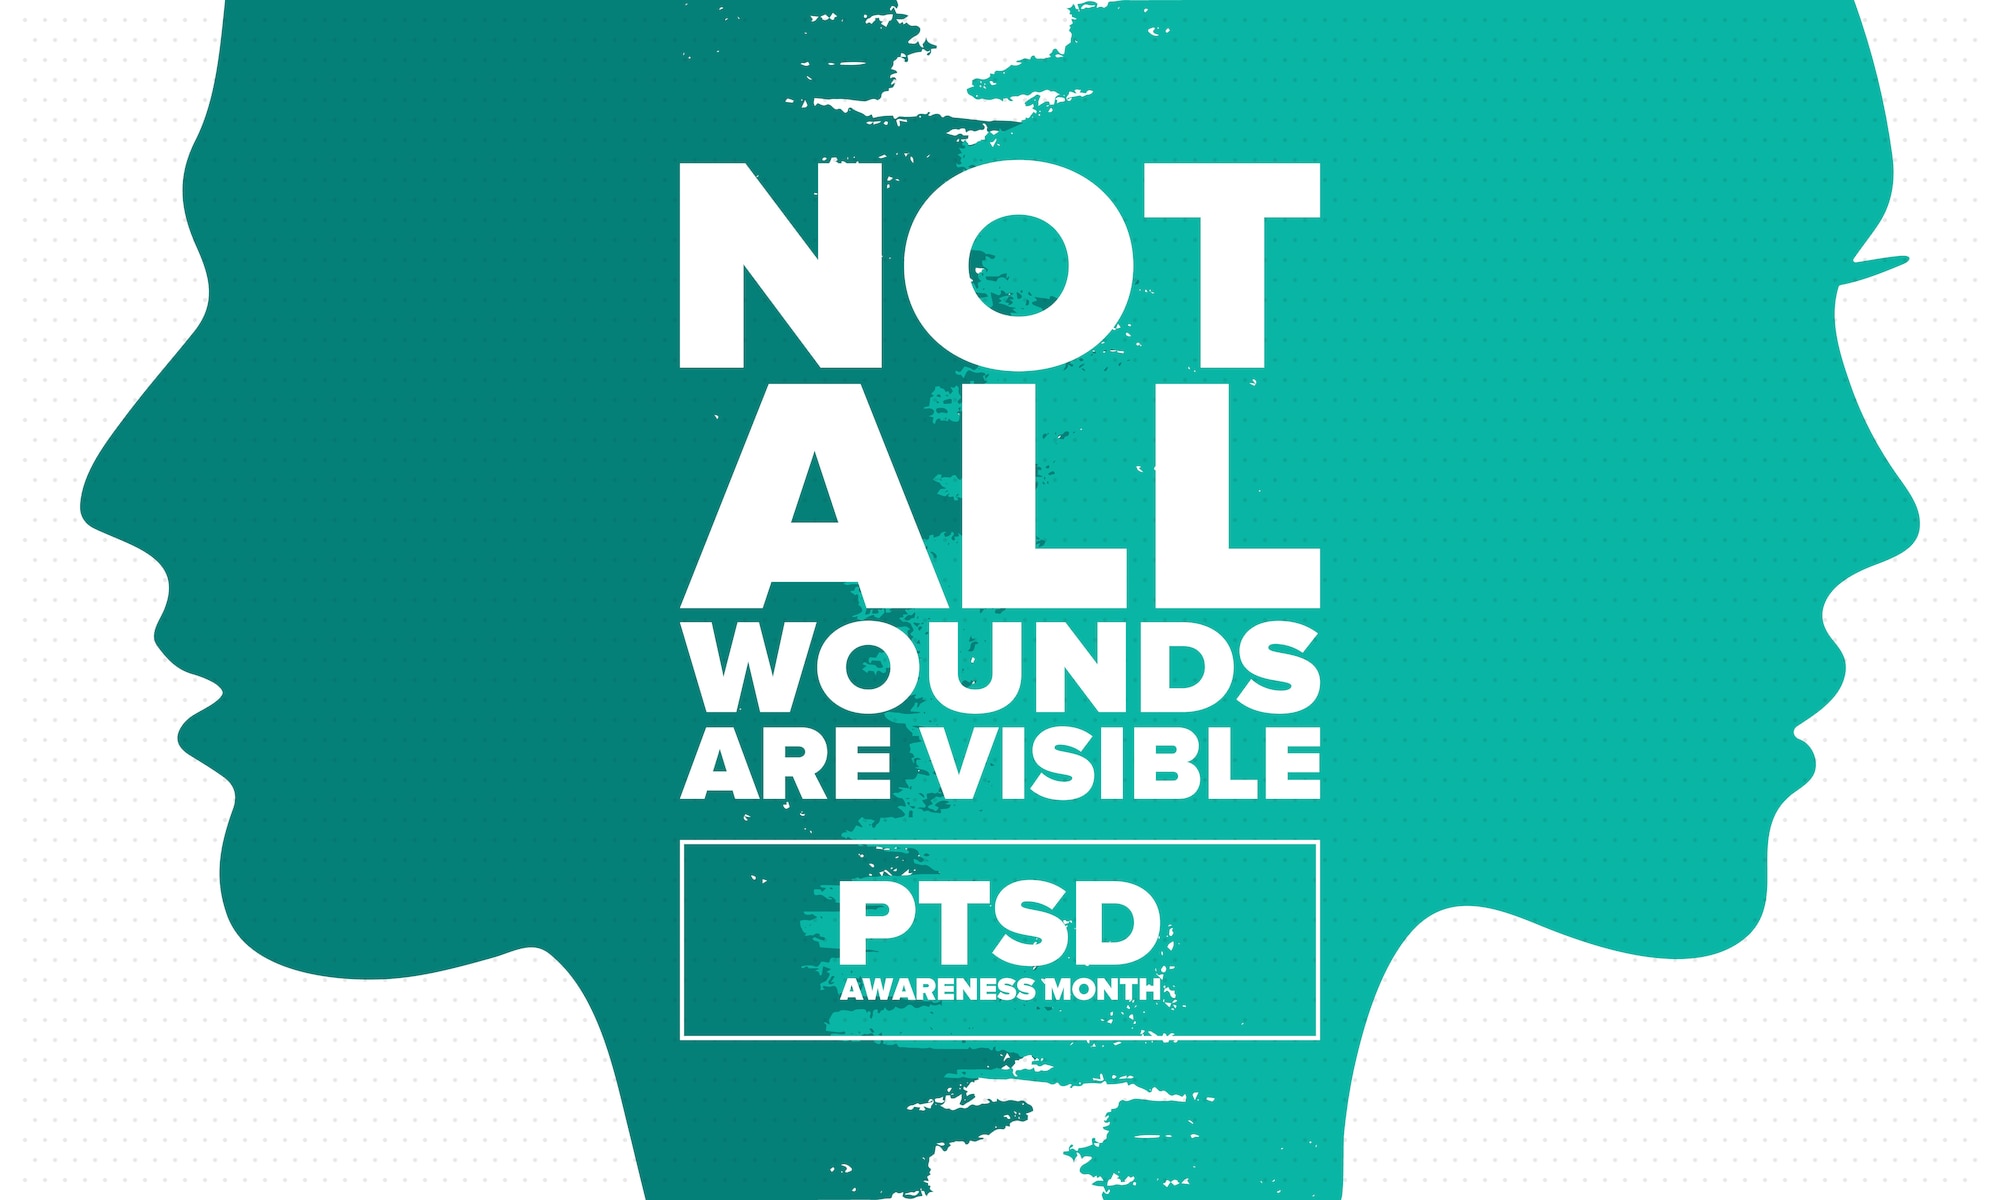 Graphic shows two head silhouettes mirrored with the text, "Not all wounds are visible - PTSD Awareness Month" superimposed over them.